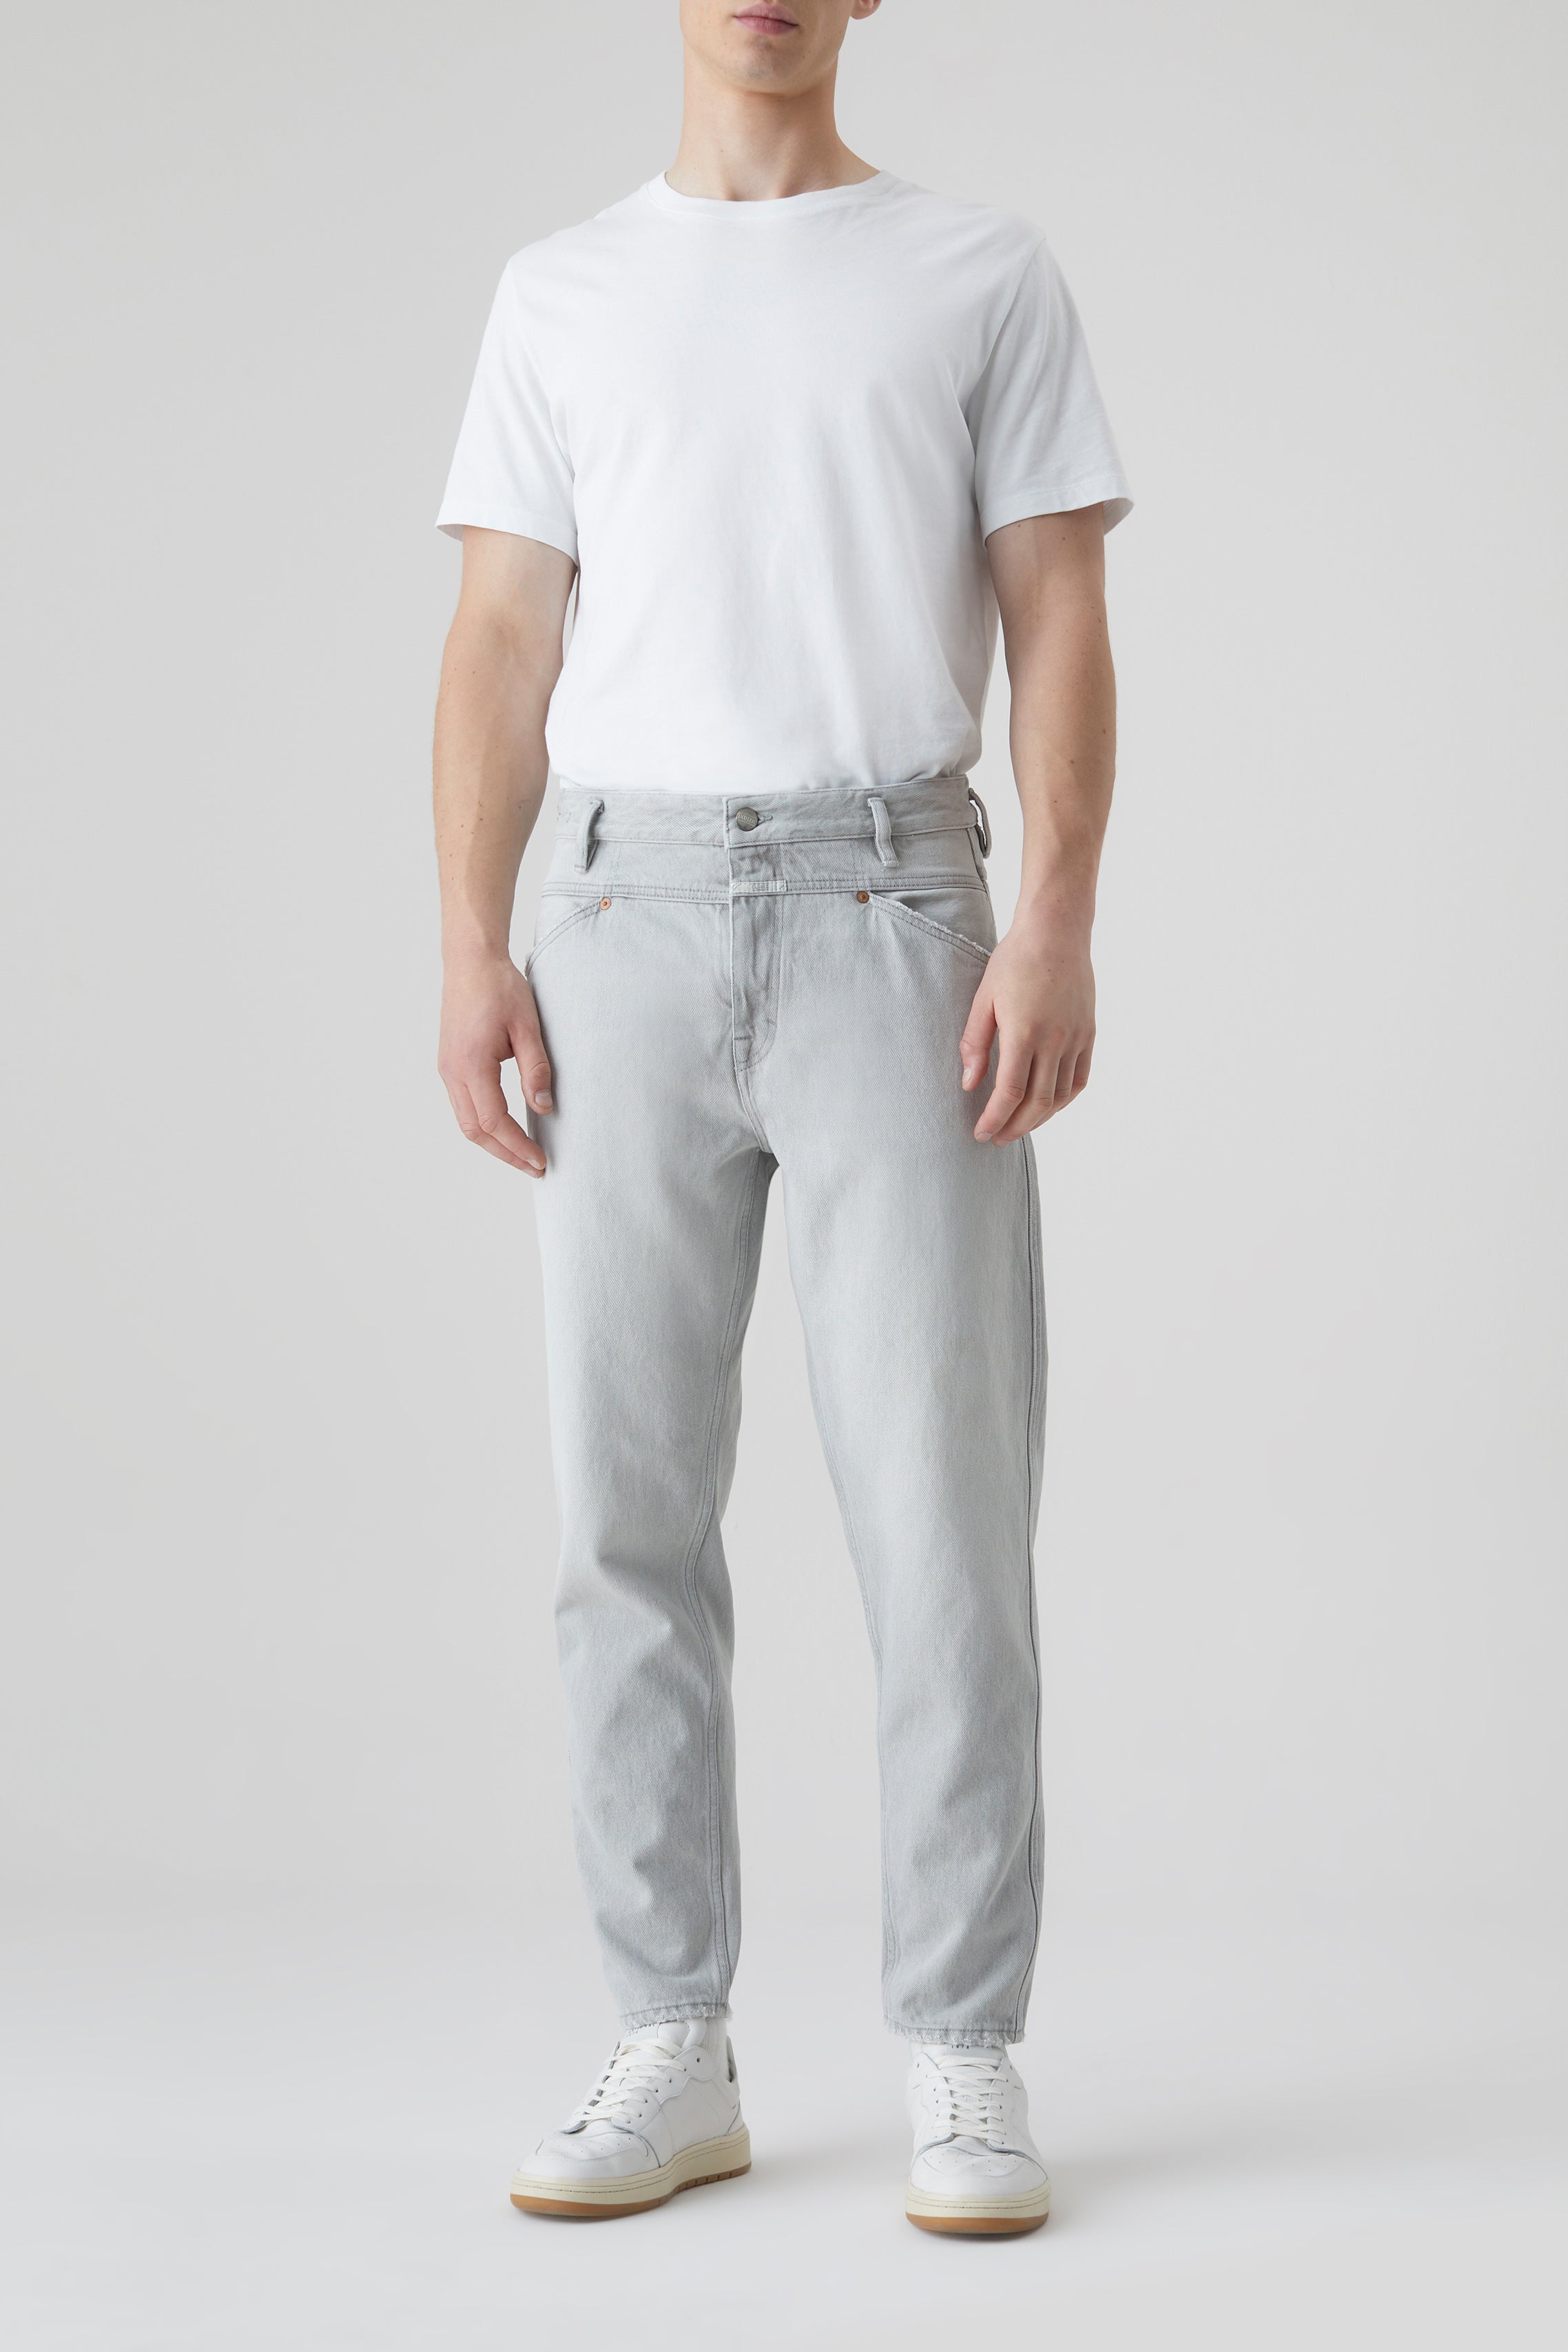 CLOSED-OUTLET-SALE-STYLE-NAME-X-LENT-TAPERED-JEANS-Hosen-ARCHIVE-COLLECTION_c3827d47-d370-49f0-829d-f3dbaa9e96c2.jpg